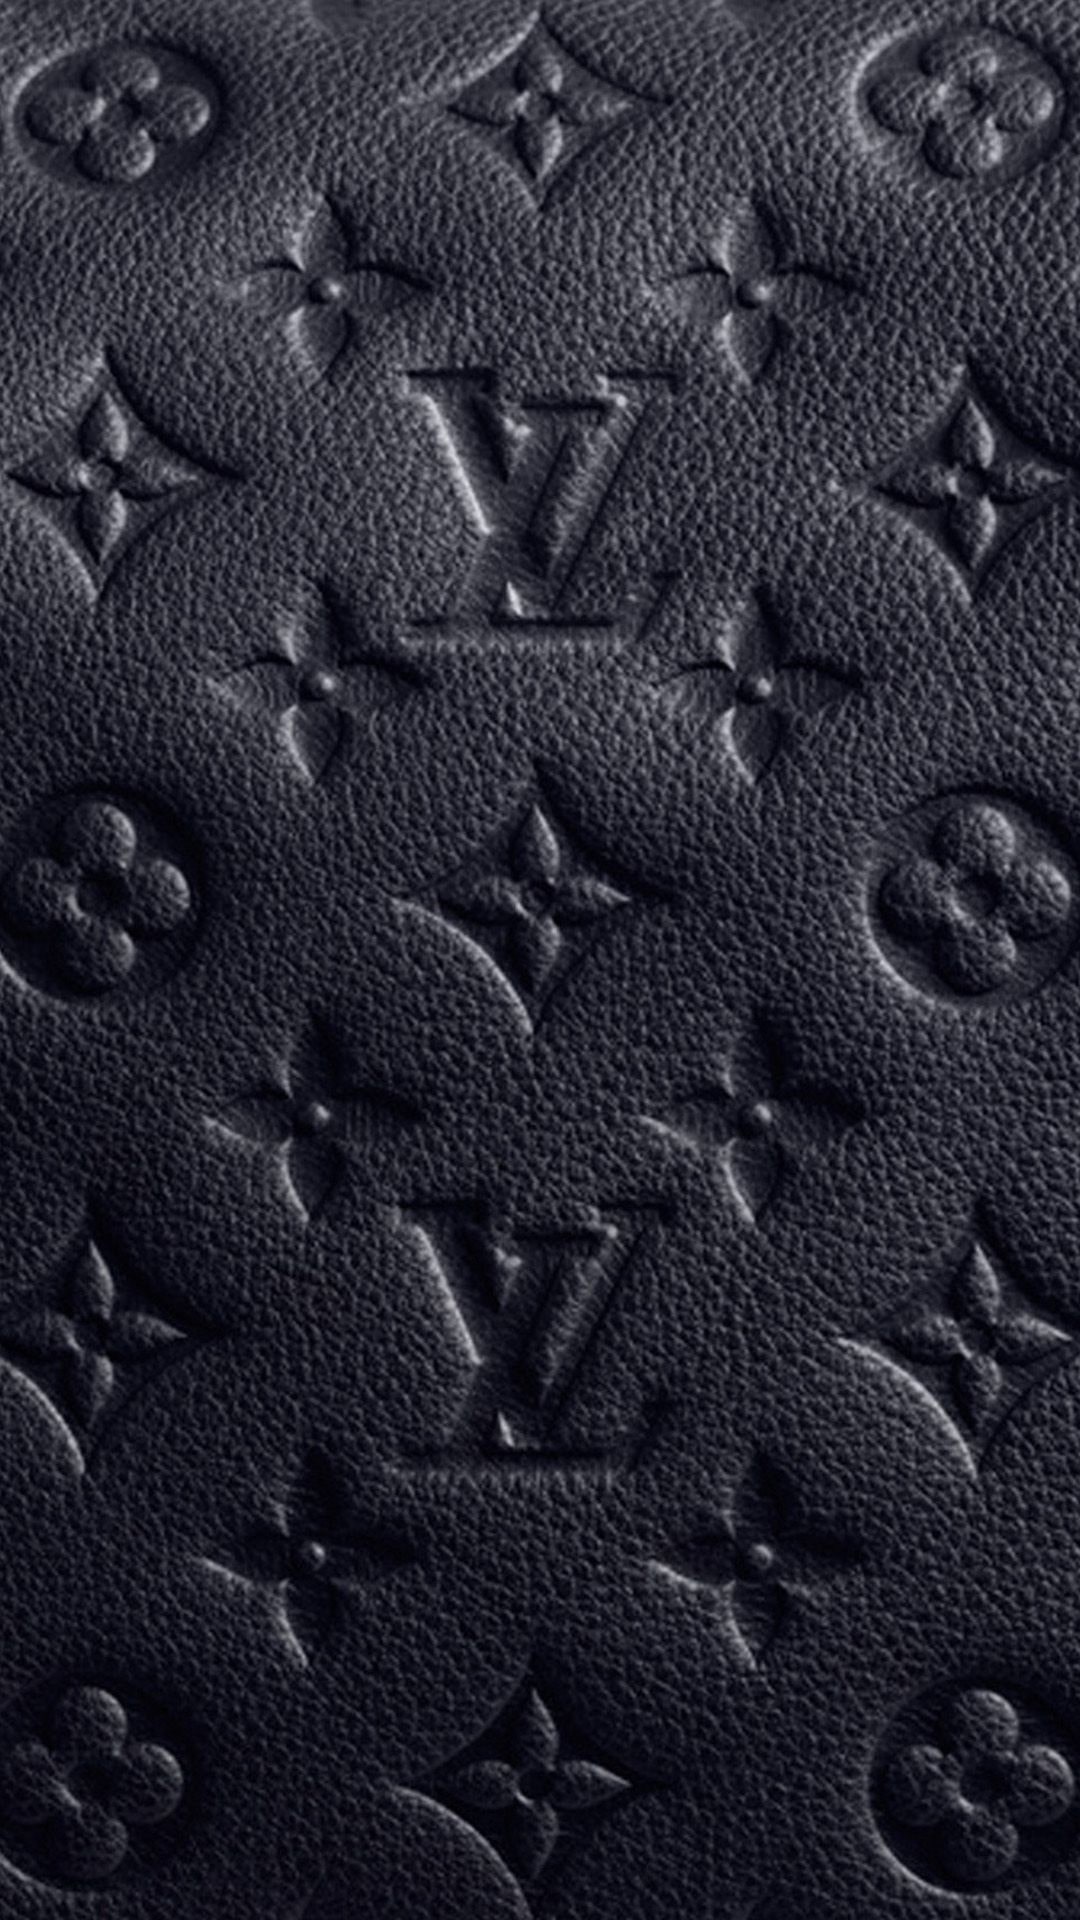 Download Gray Leather Louis Vuitton Phone Wallpaper